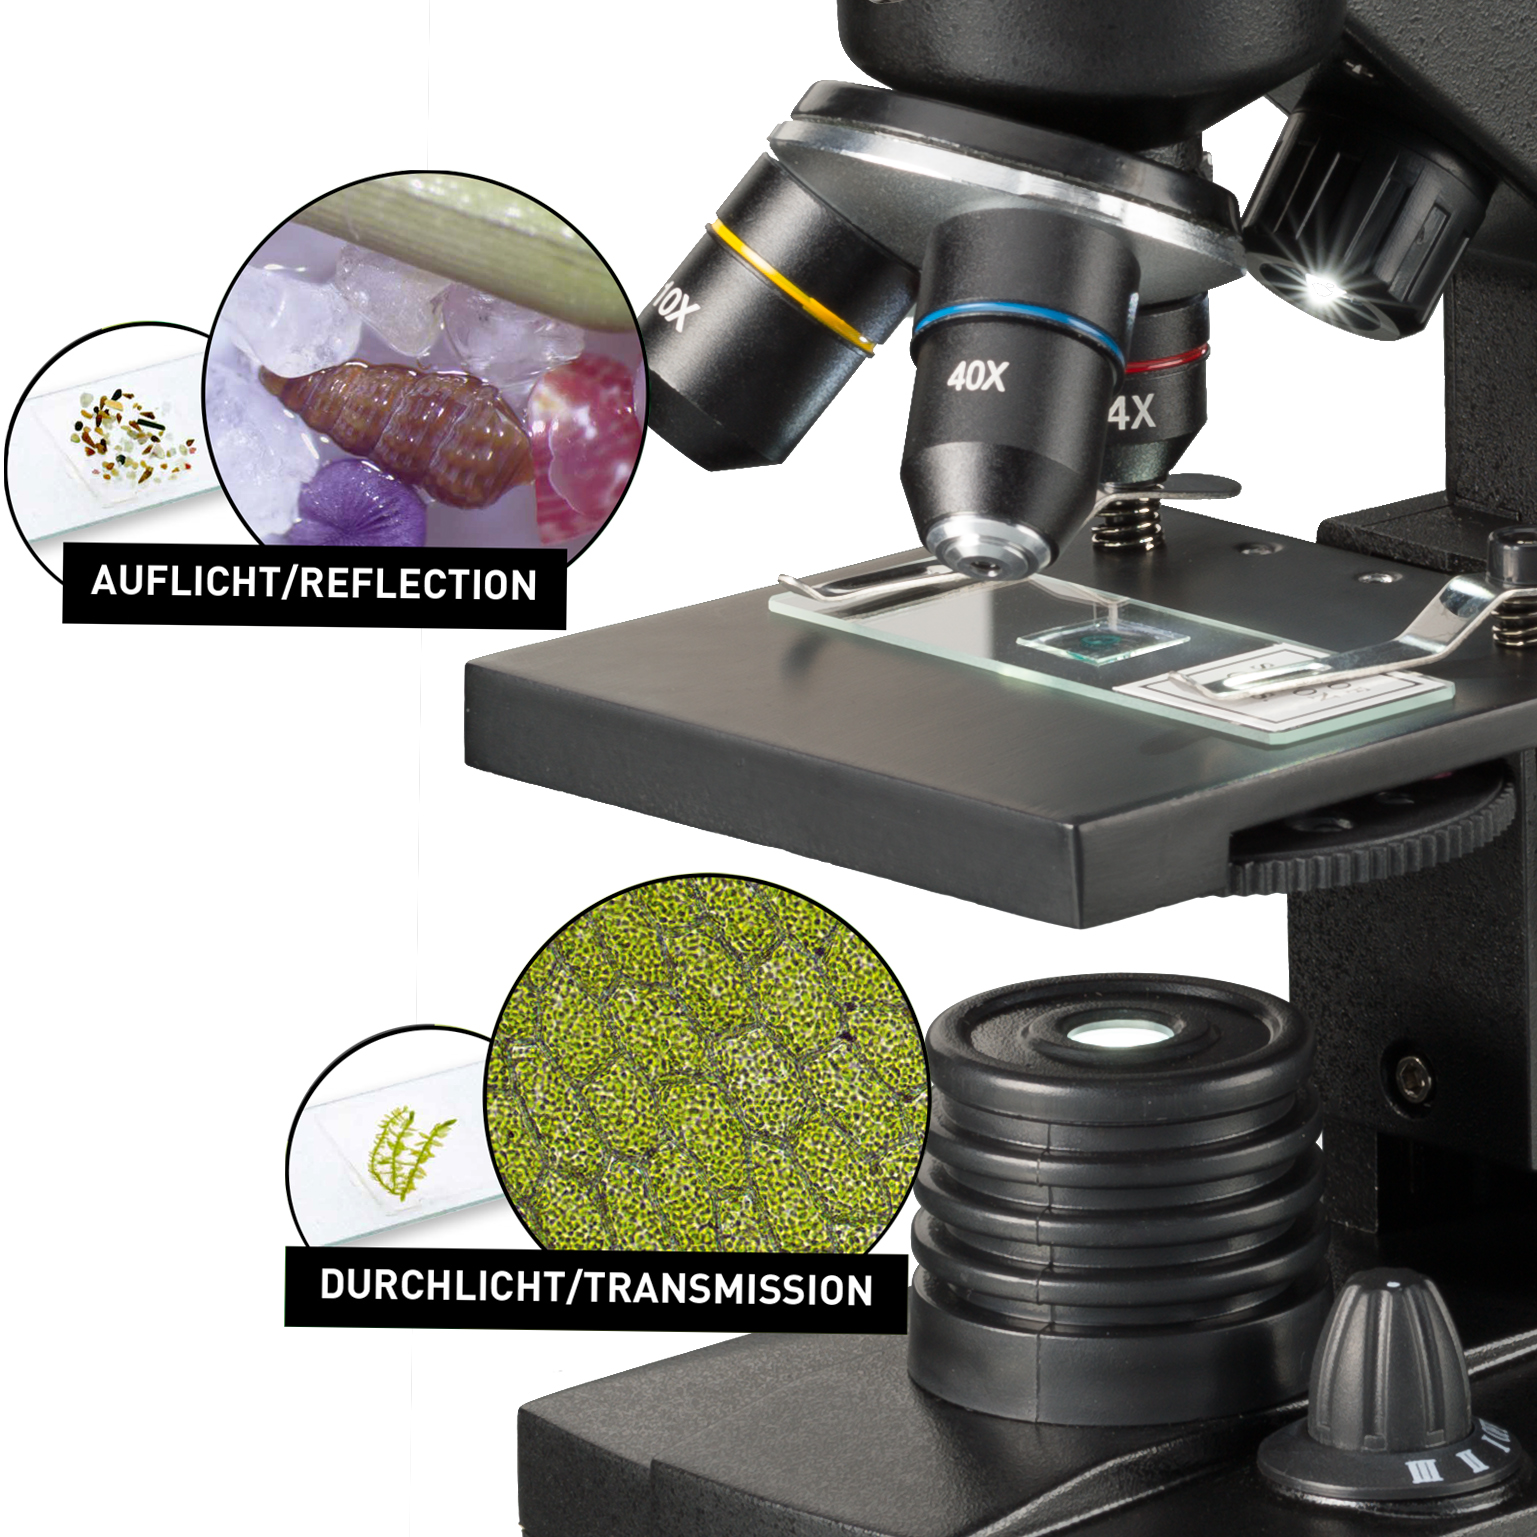 NATIONAL GEOGRAPHIC 40x-1280x Microscope with Smartphone holder